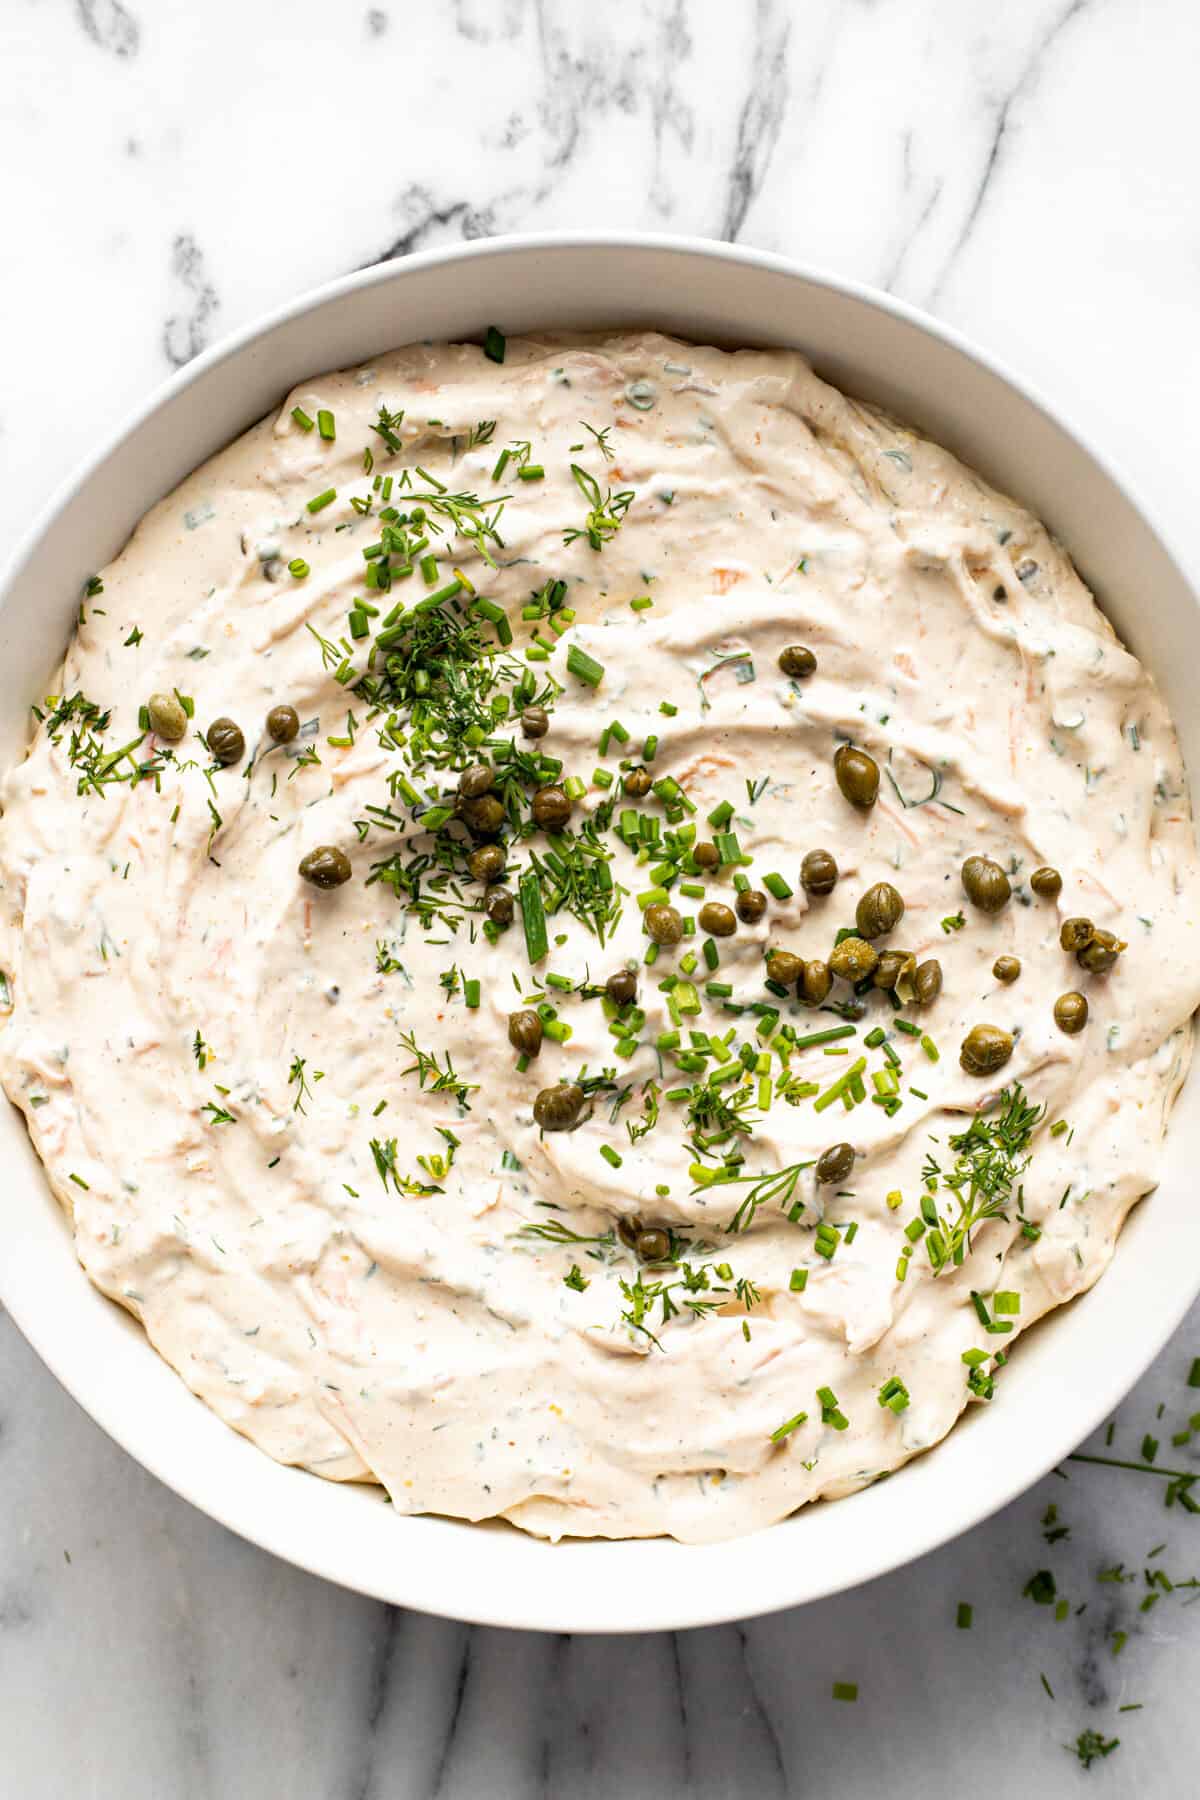 White bowl filled with smoked salmon dip garnished with capers, chives, and dill.